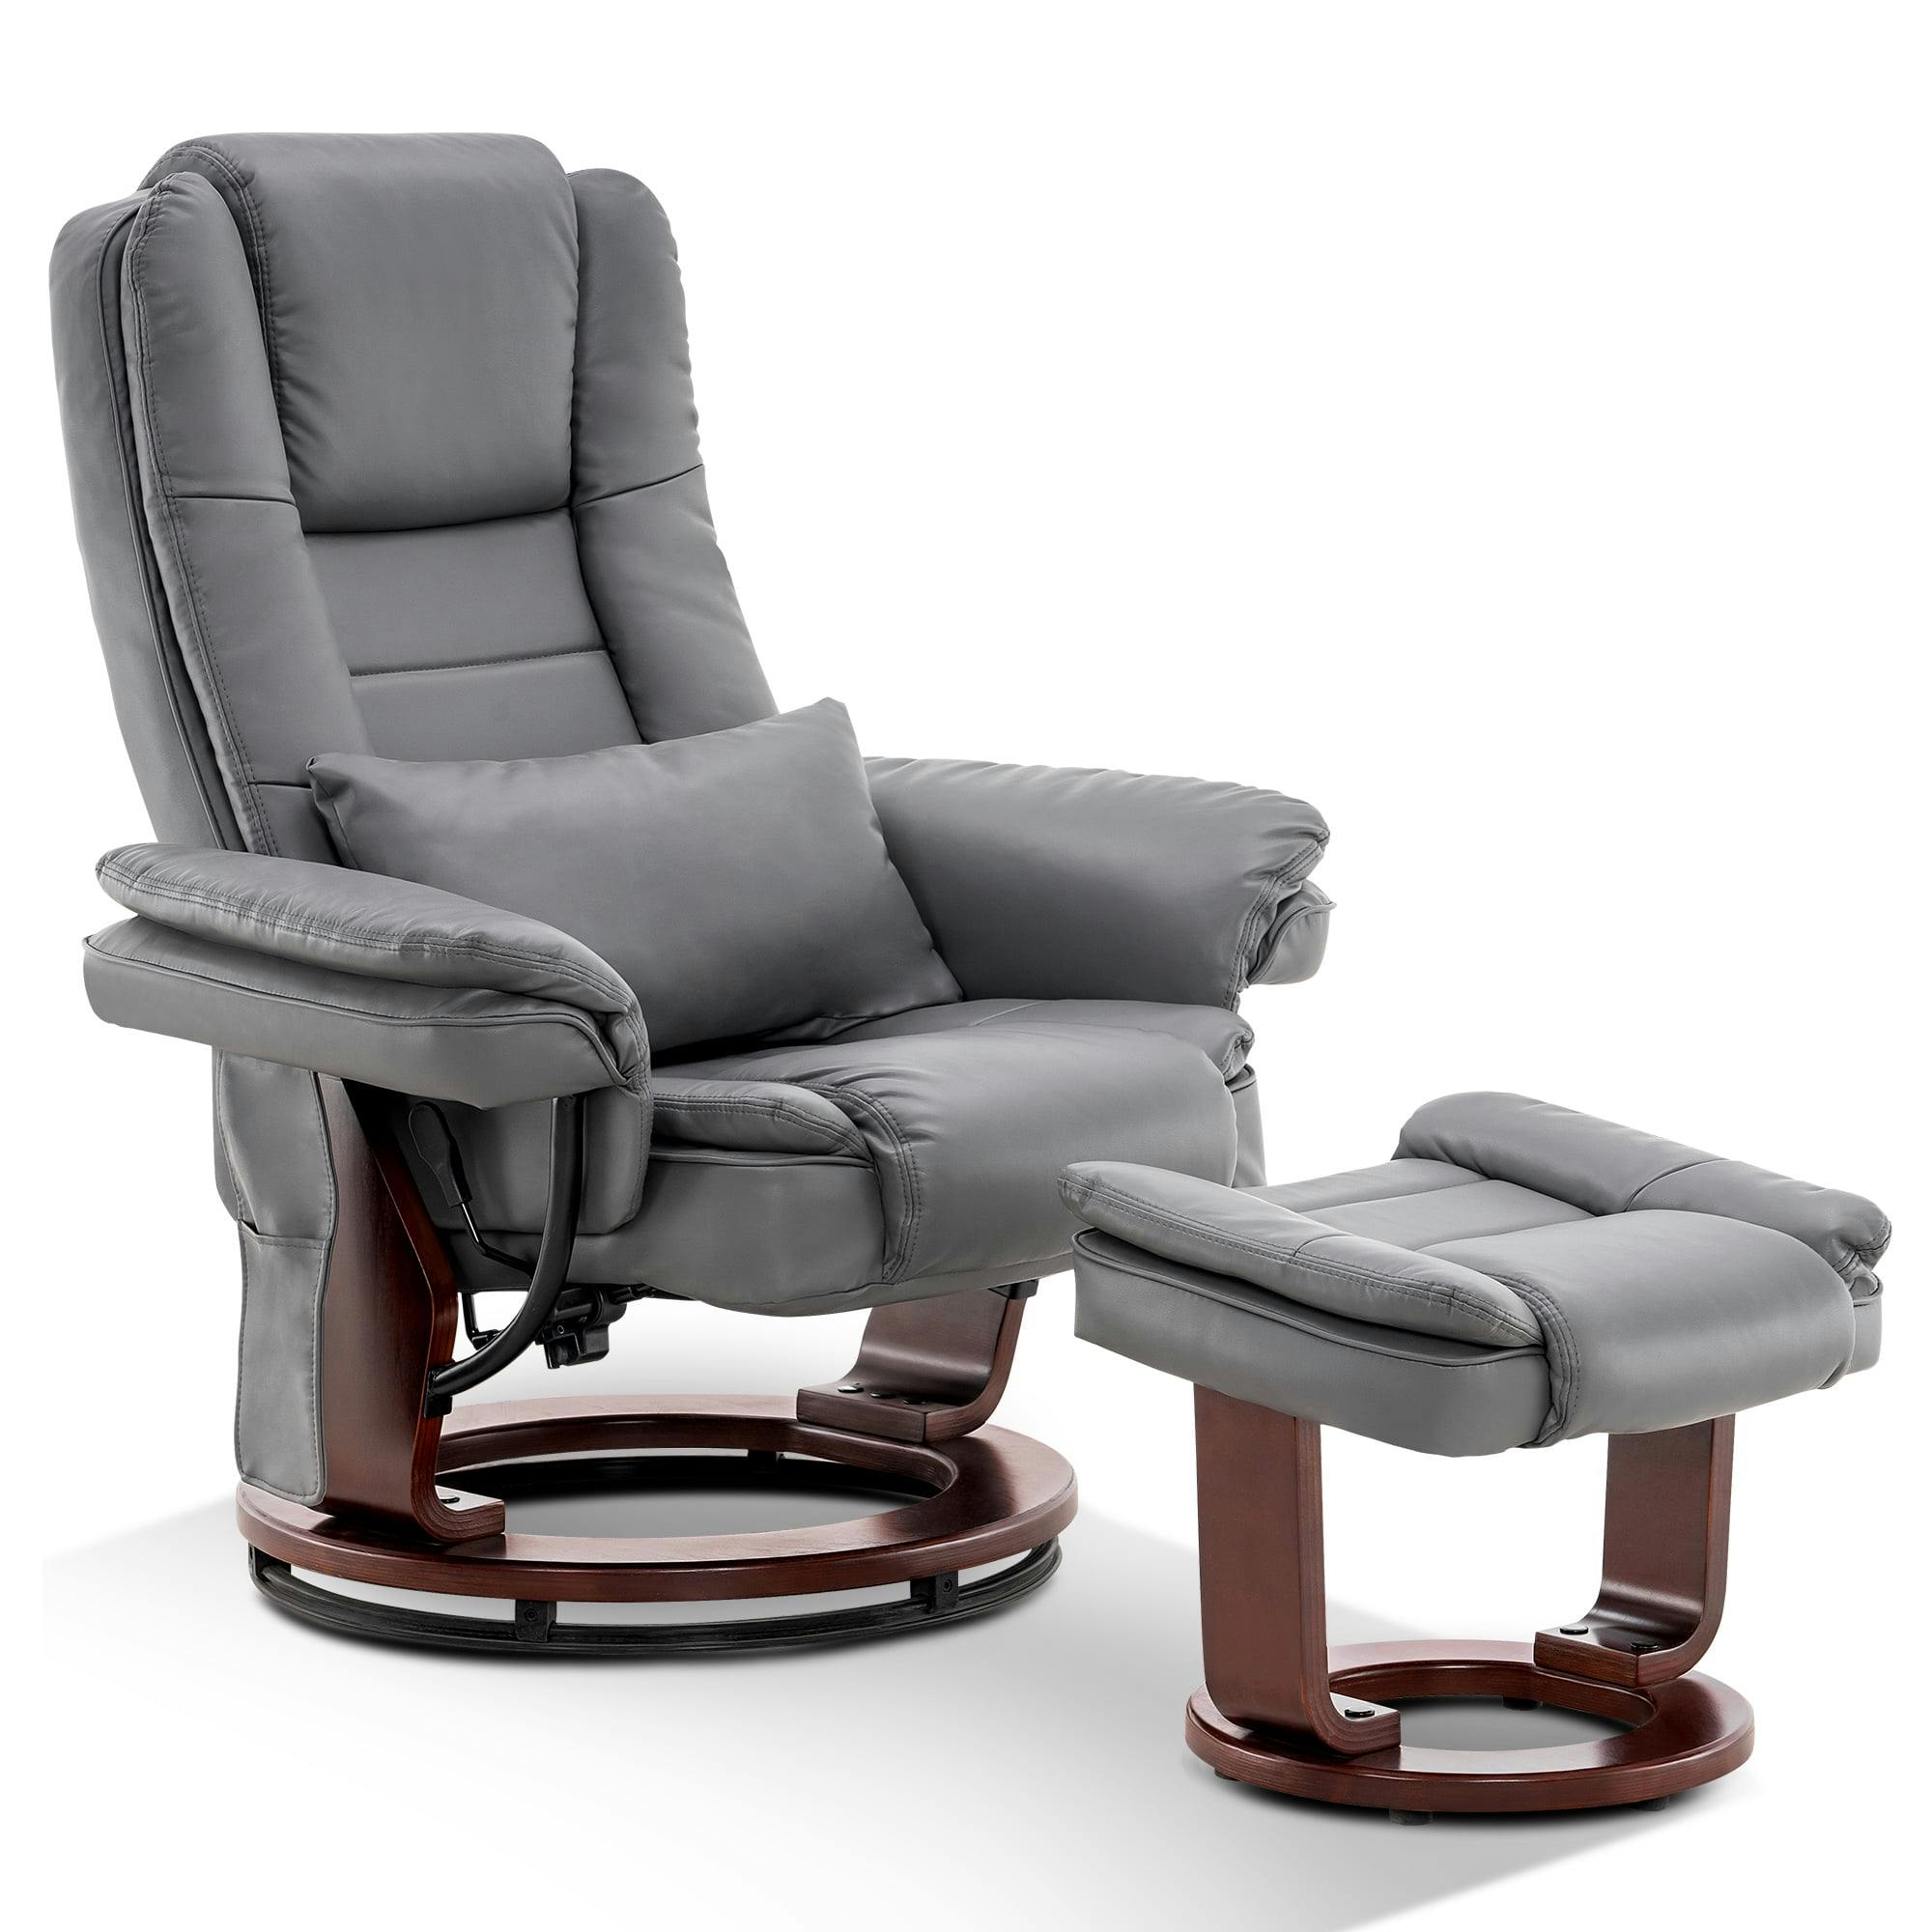 Luxury Gray Leather Swivel Recliner with Massage Features and Ottoman